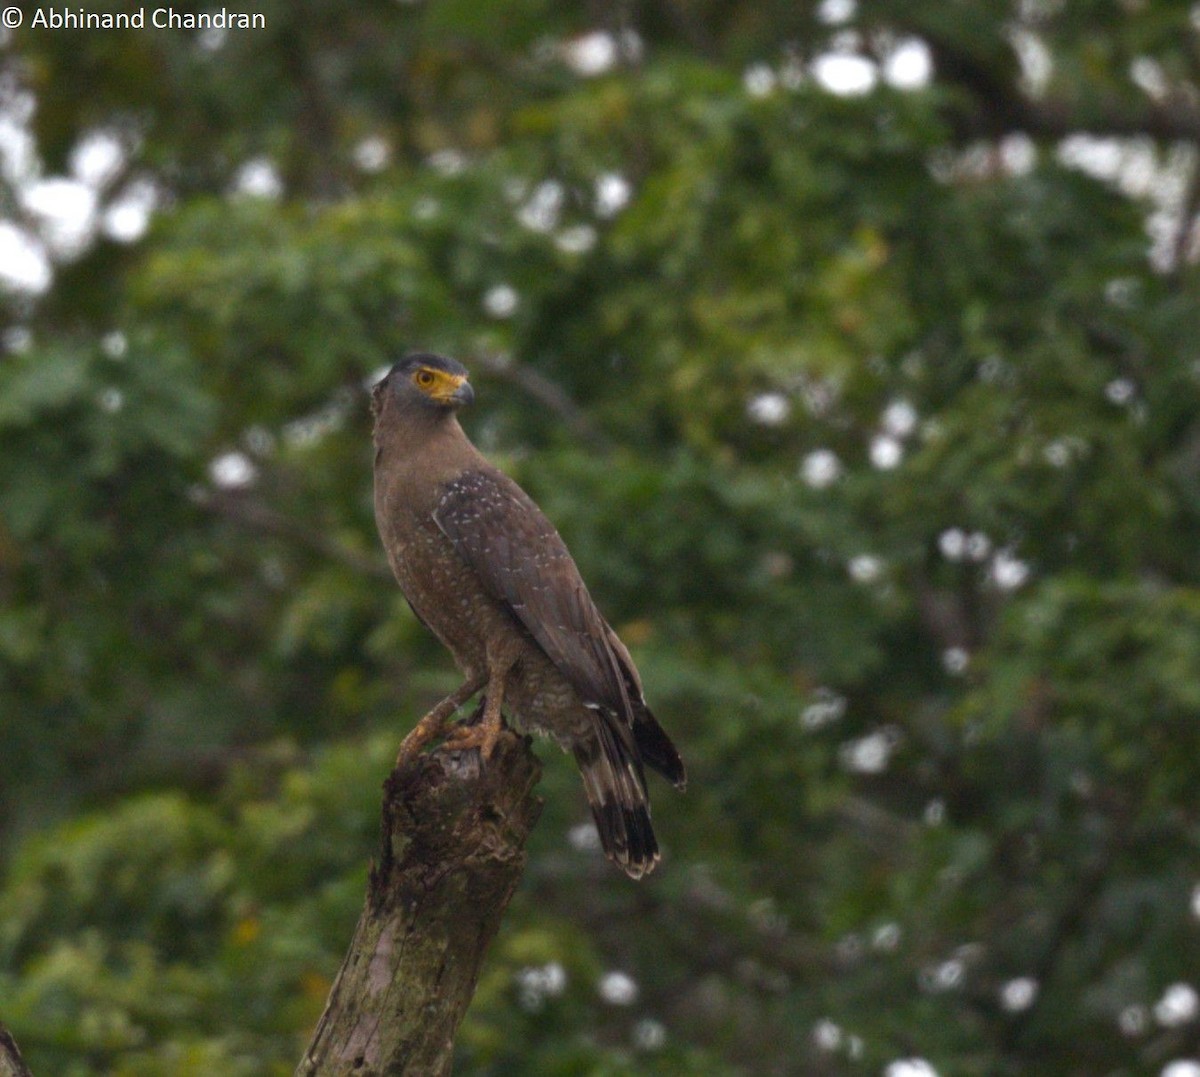 Crested Serpent-Eagle (Andaman) - Abhinand C